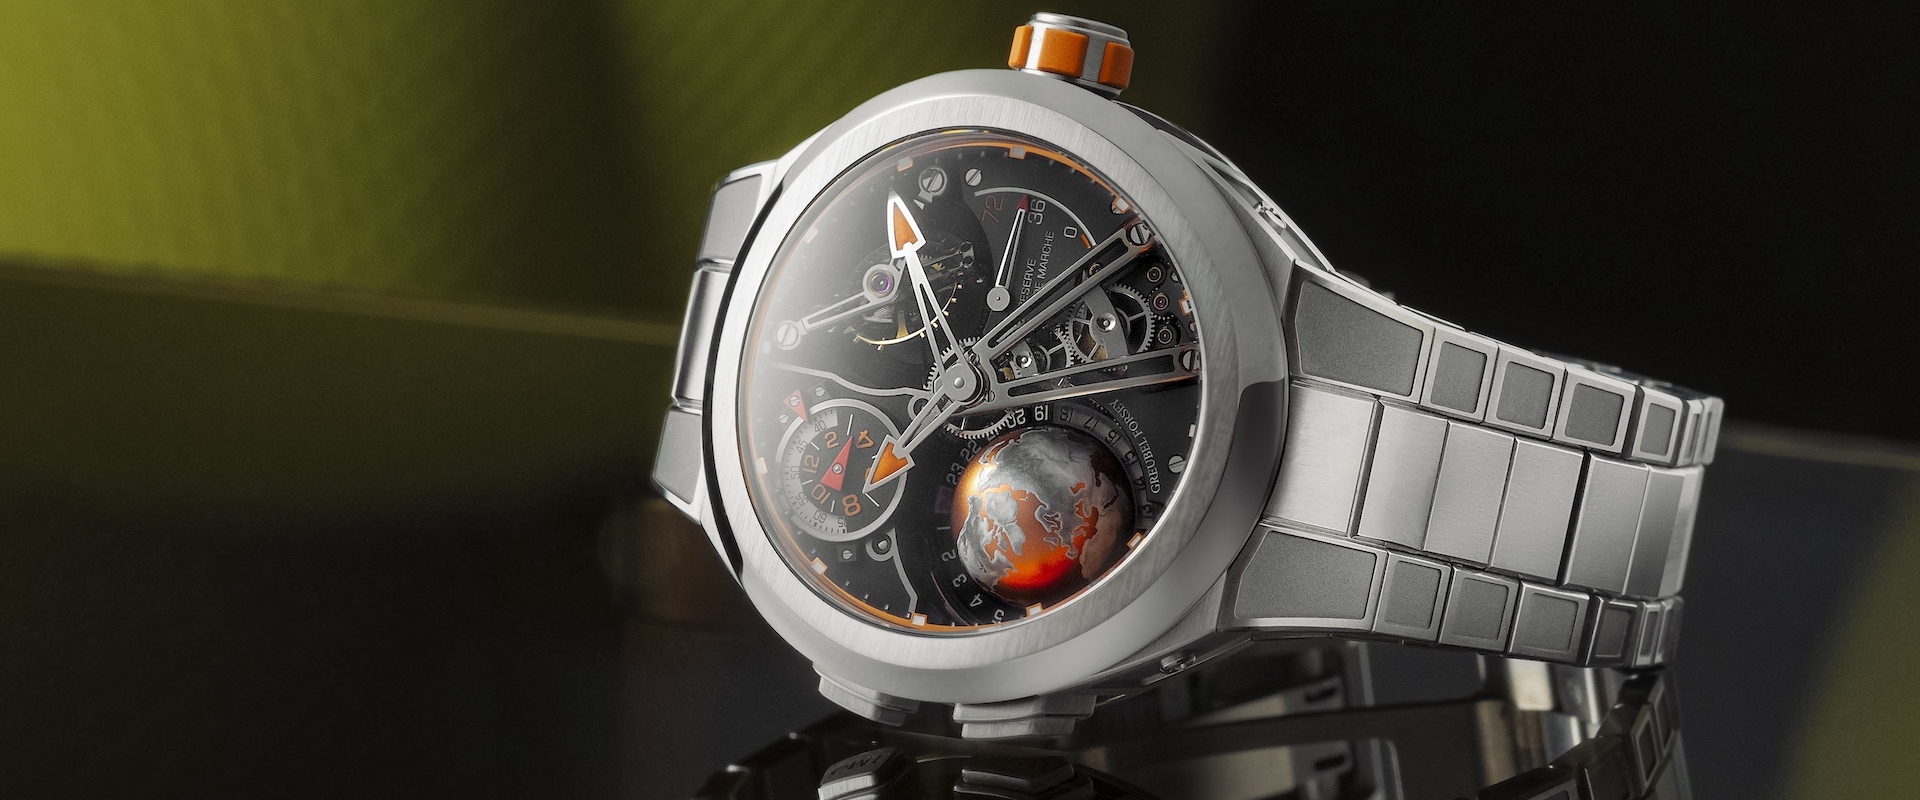 Greubel Forsey GMT Sport Sincere Fine Watches Edition